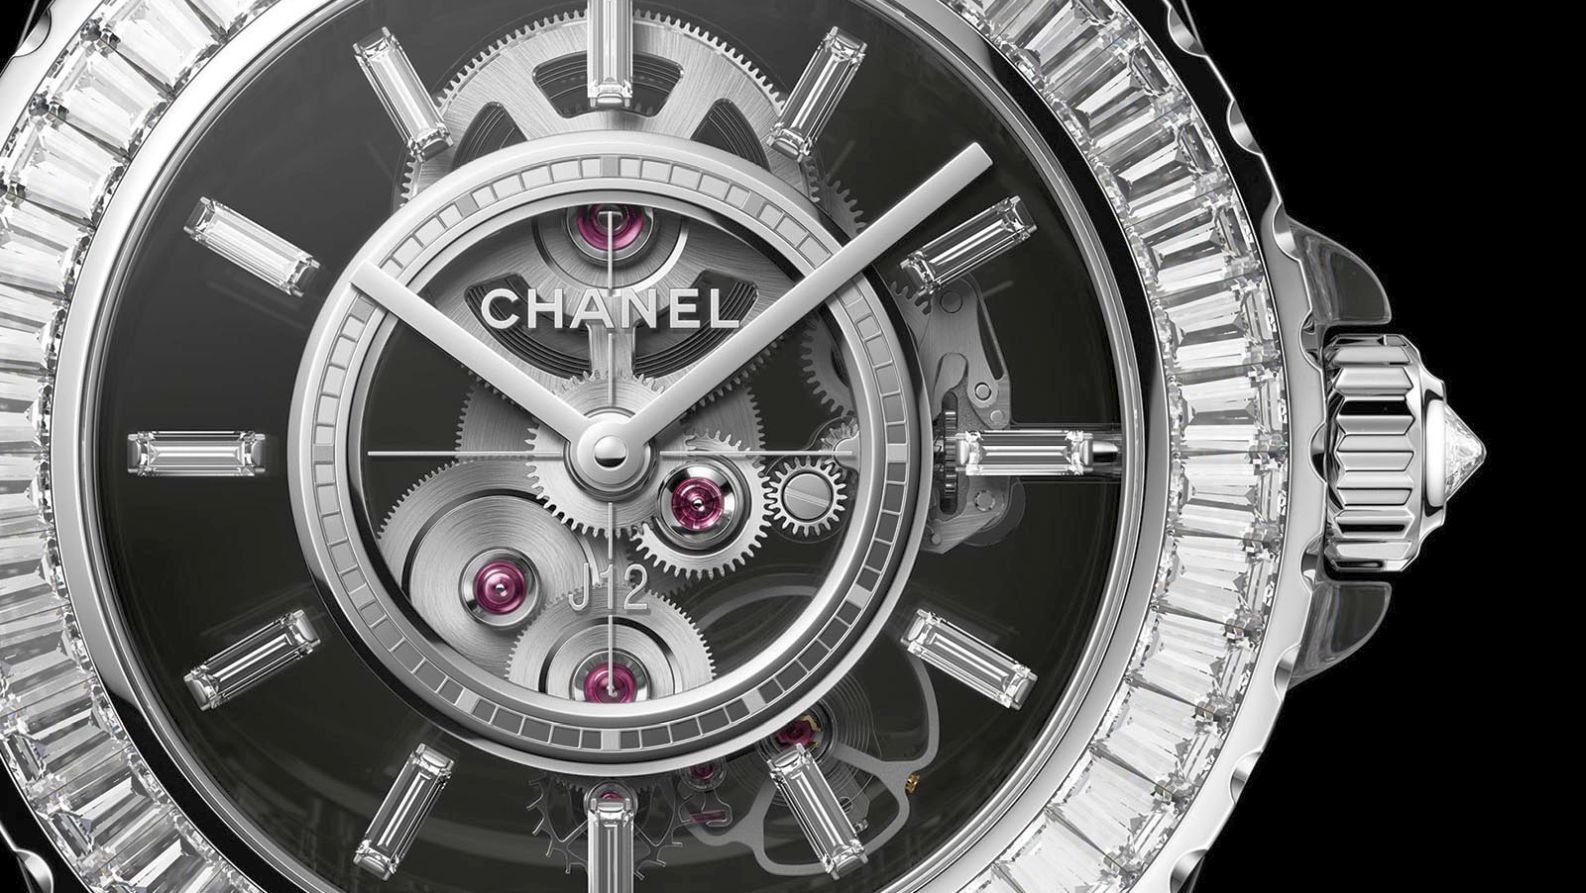 Chanel J12 for Rs.1,131,228 for sale from a Private Seller on Chrono24